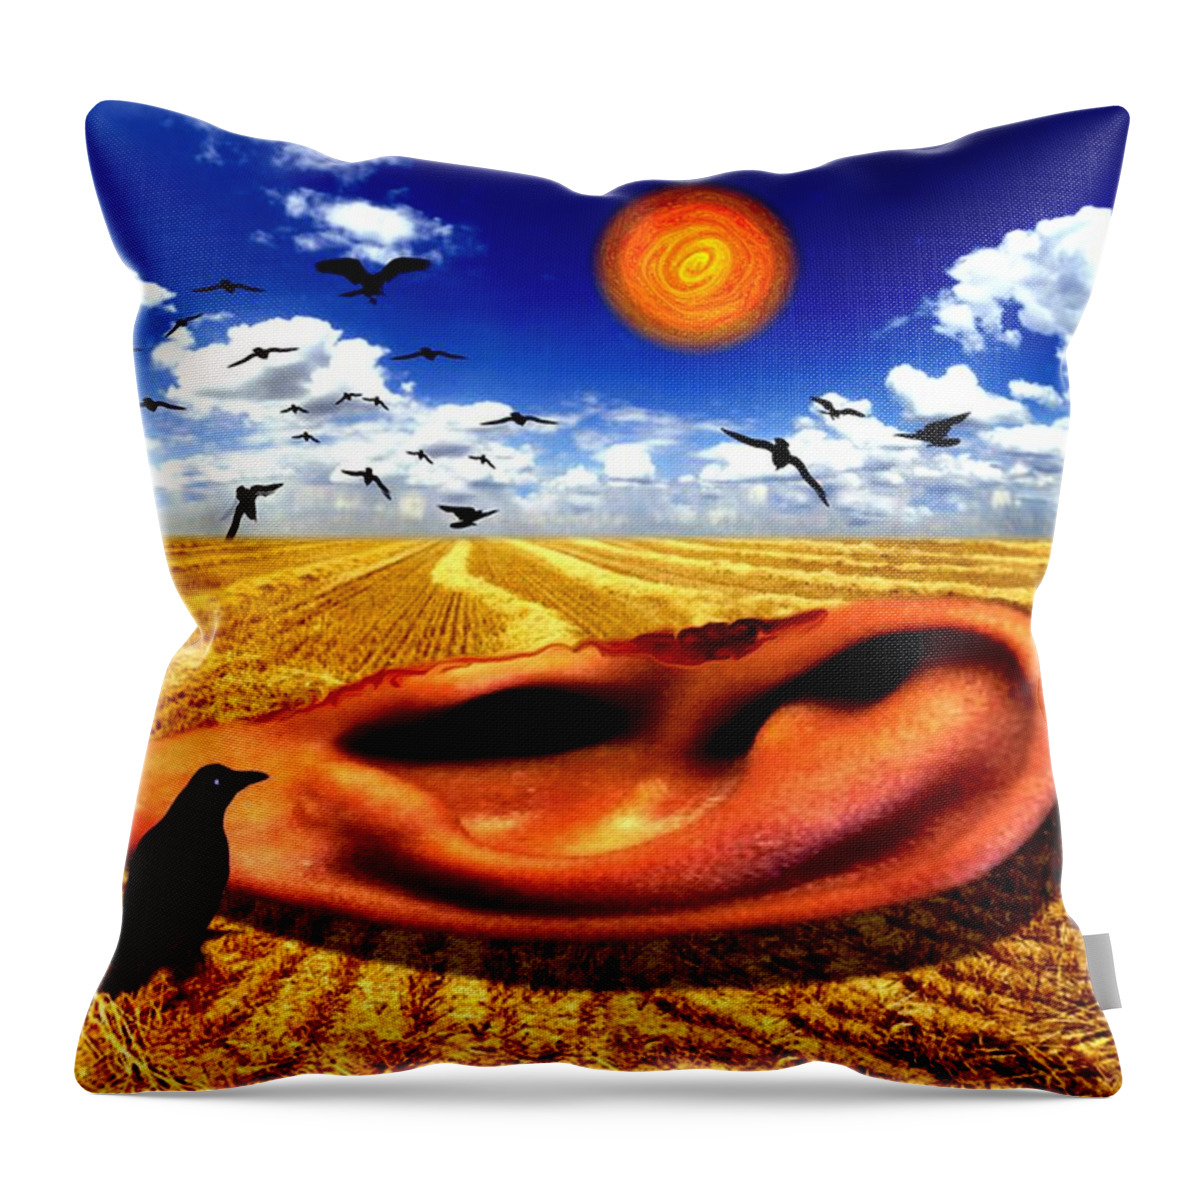  Throw Pillow featuring the painting Archi W Bechlenberg - Van Goghs Ear by Les Classics